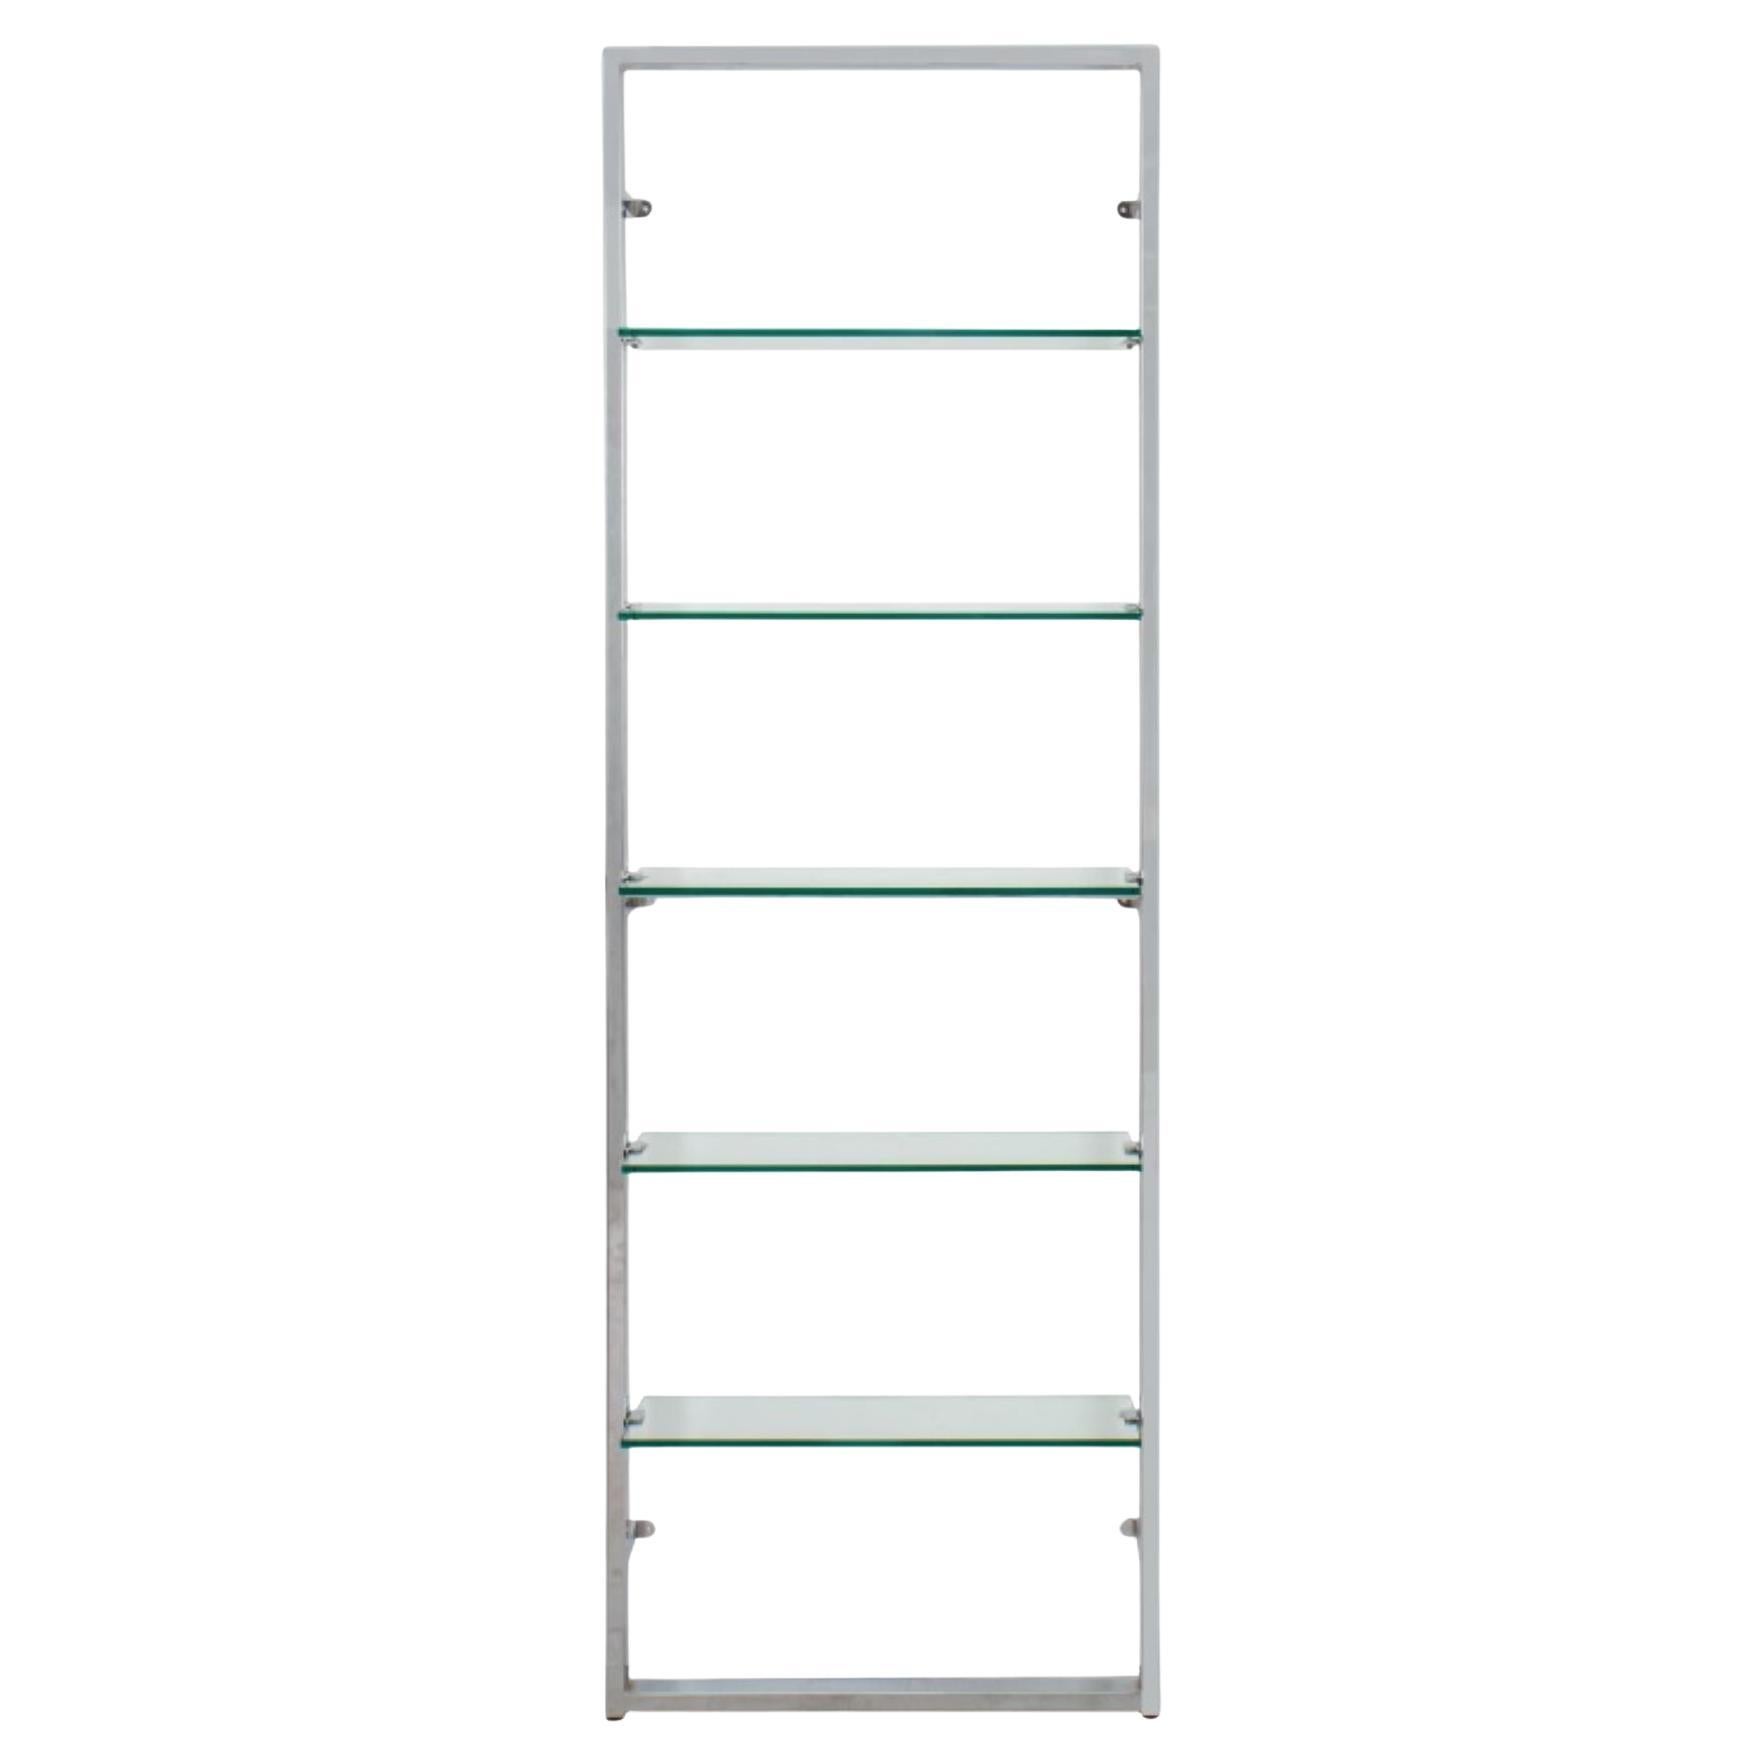 Streamline Moderne Chrome Wall Mounted Etagere For Sale